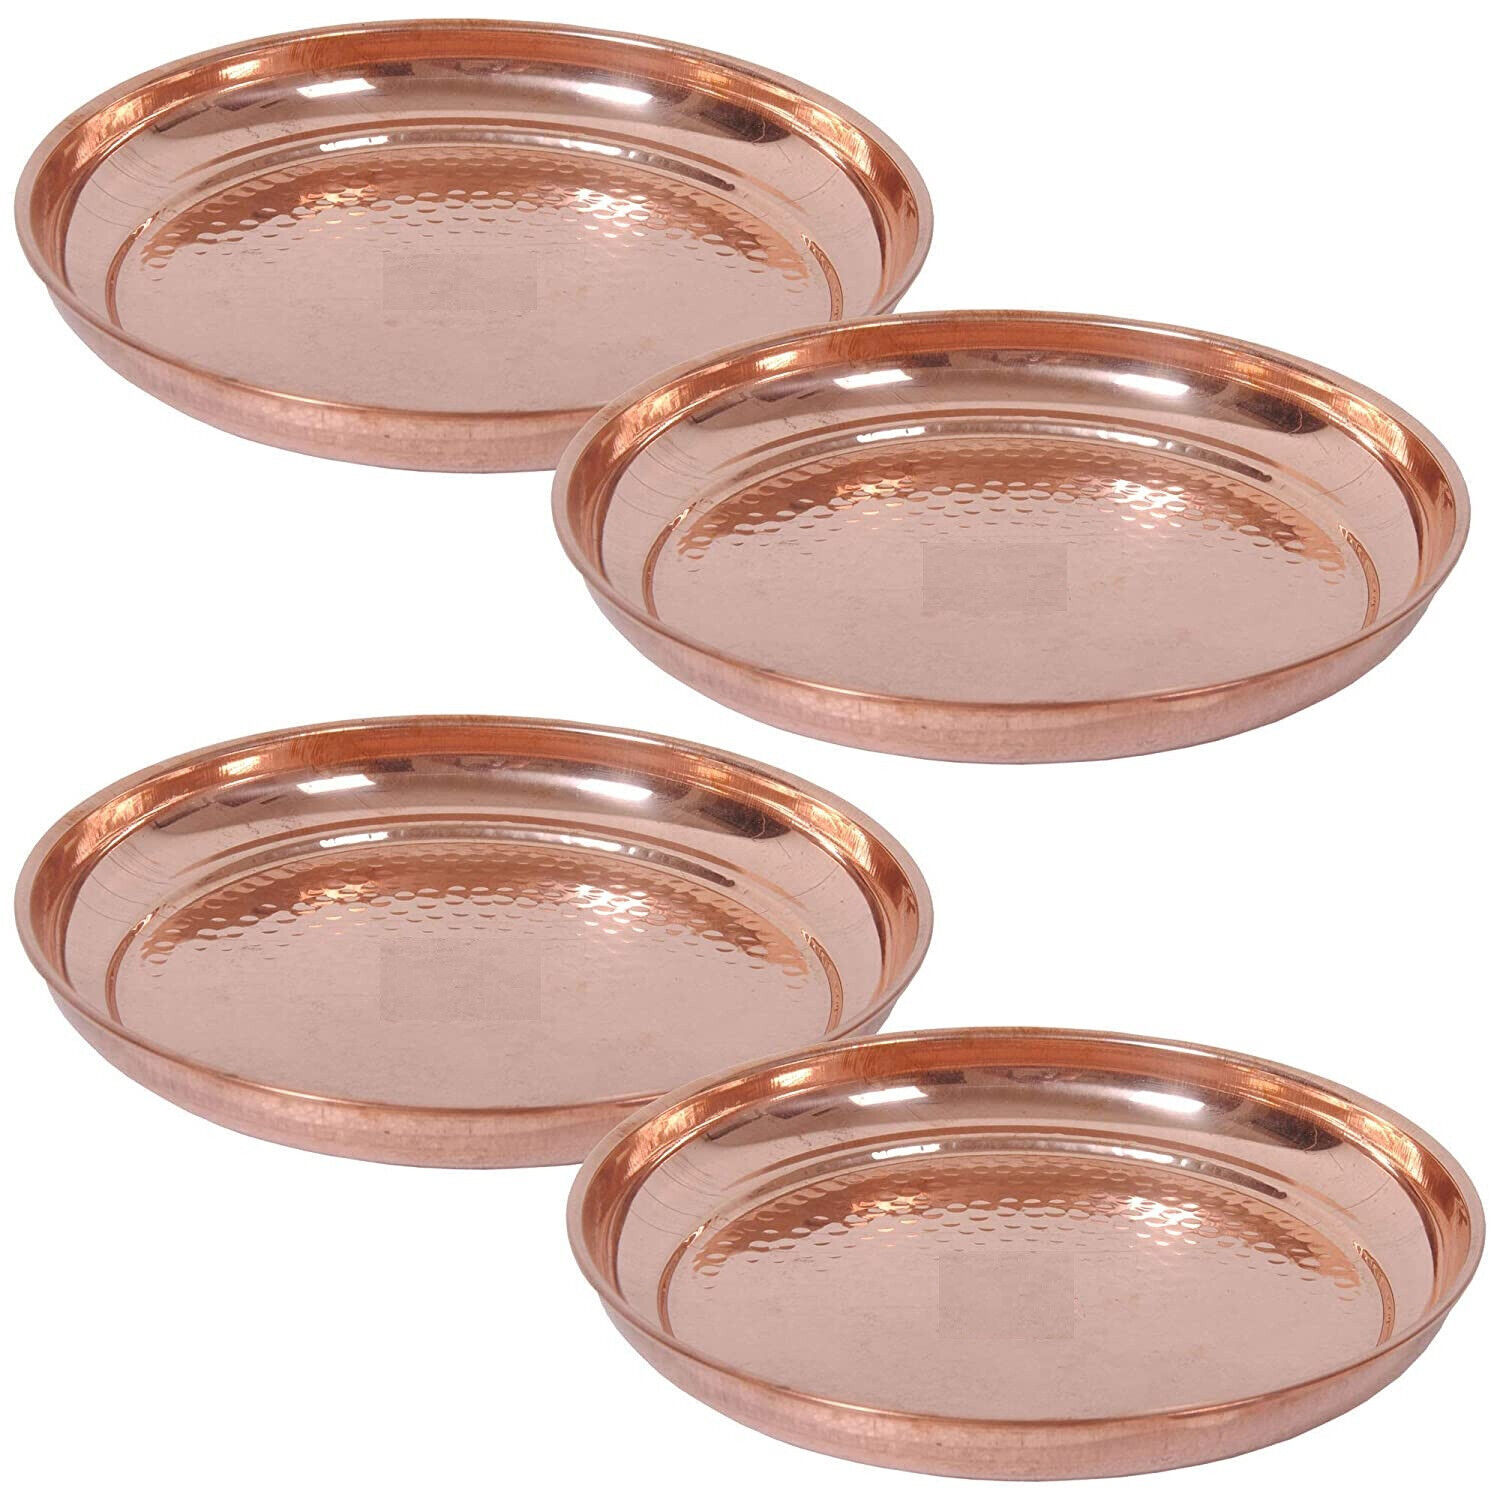 Indian Traditional Pure Copper Handmade Plate For Dinner Serving Set Of 4